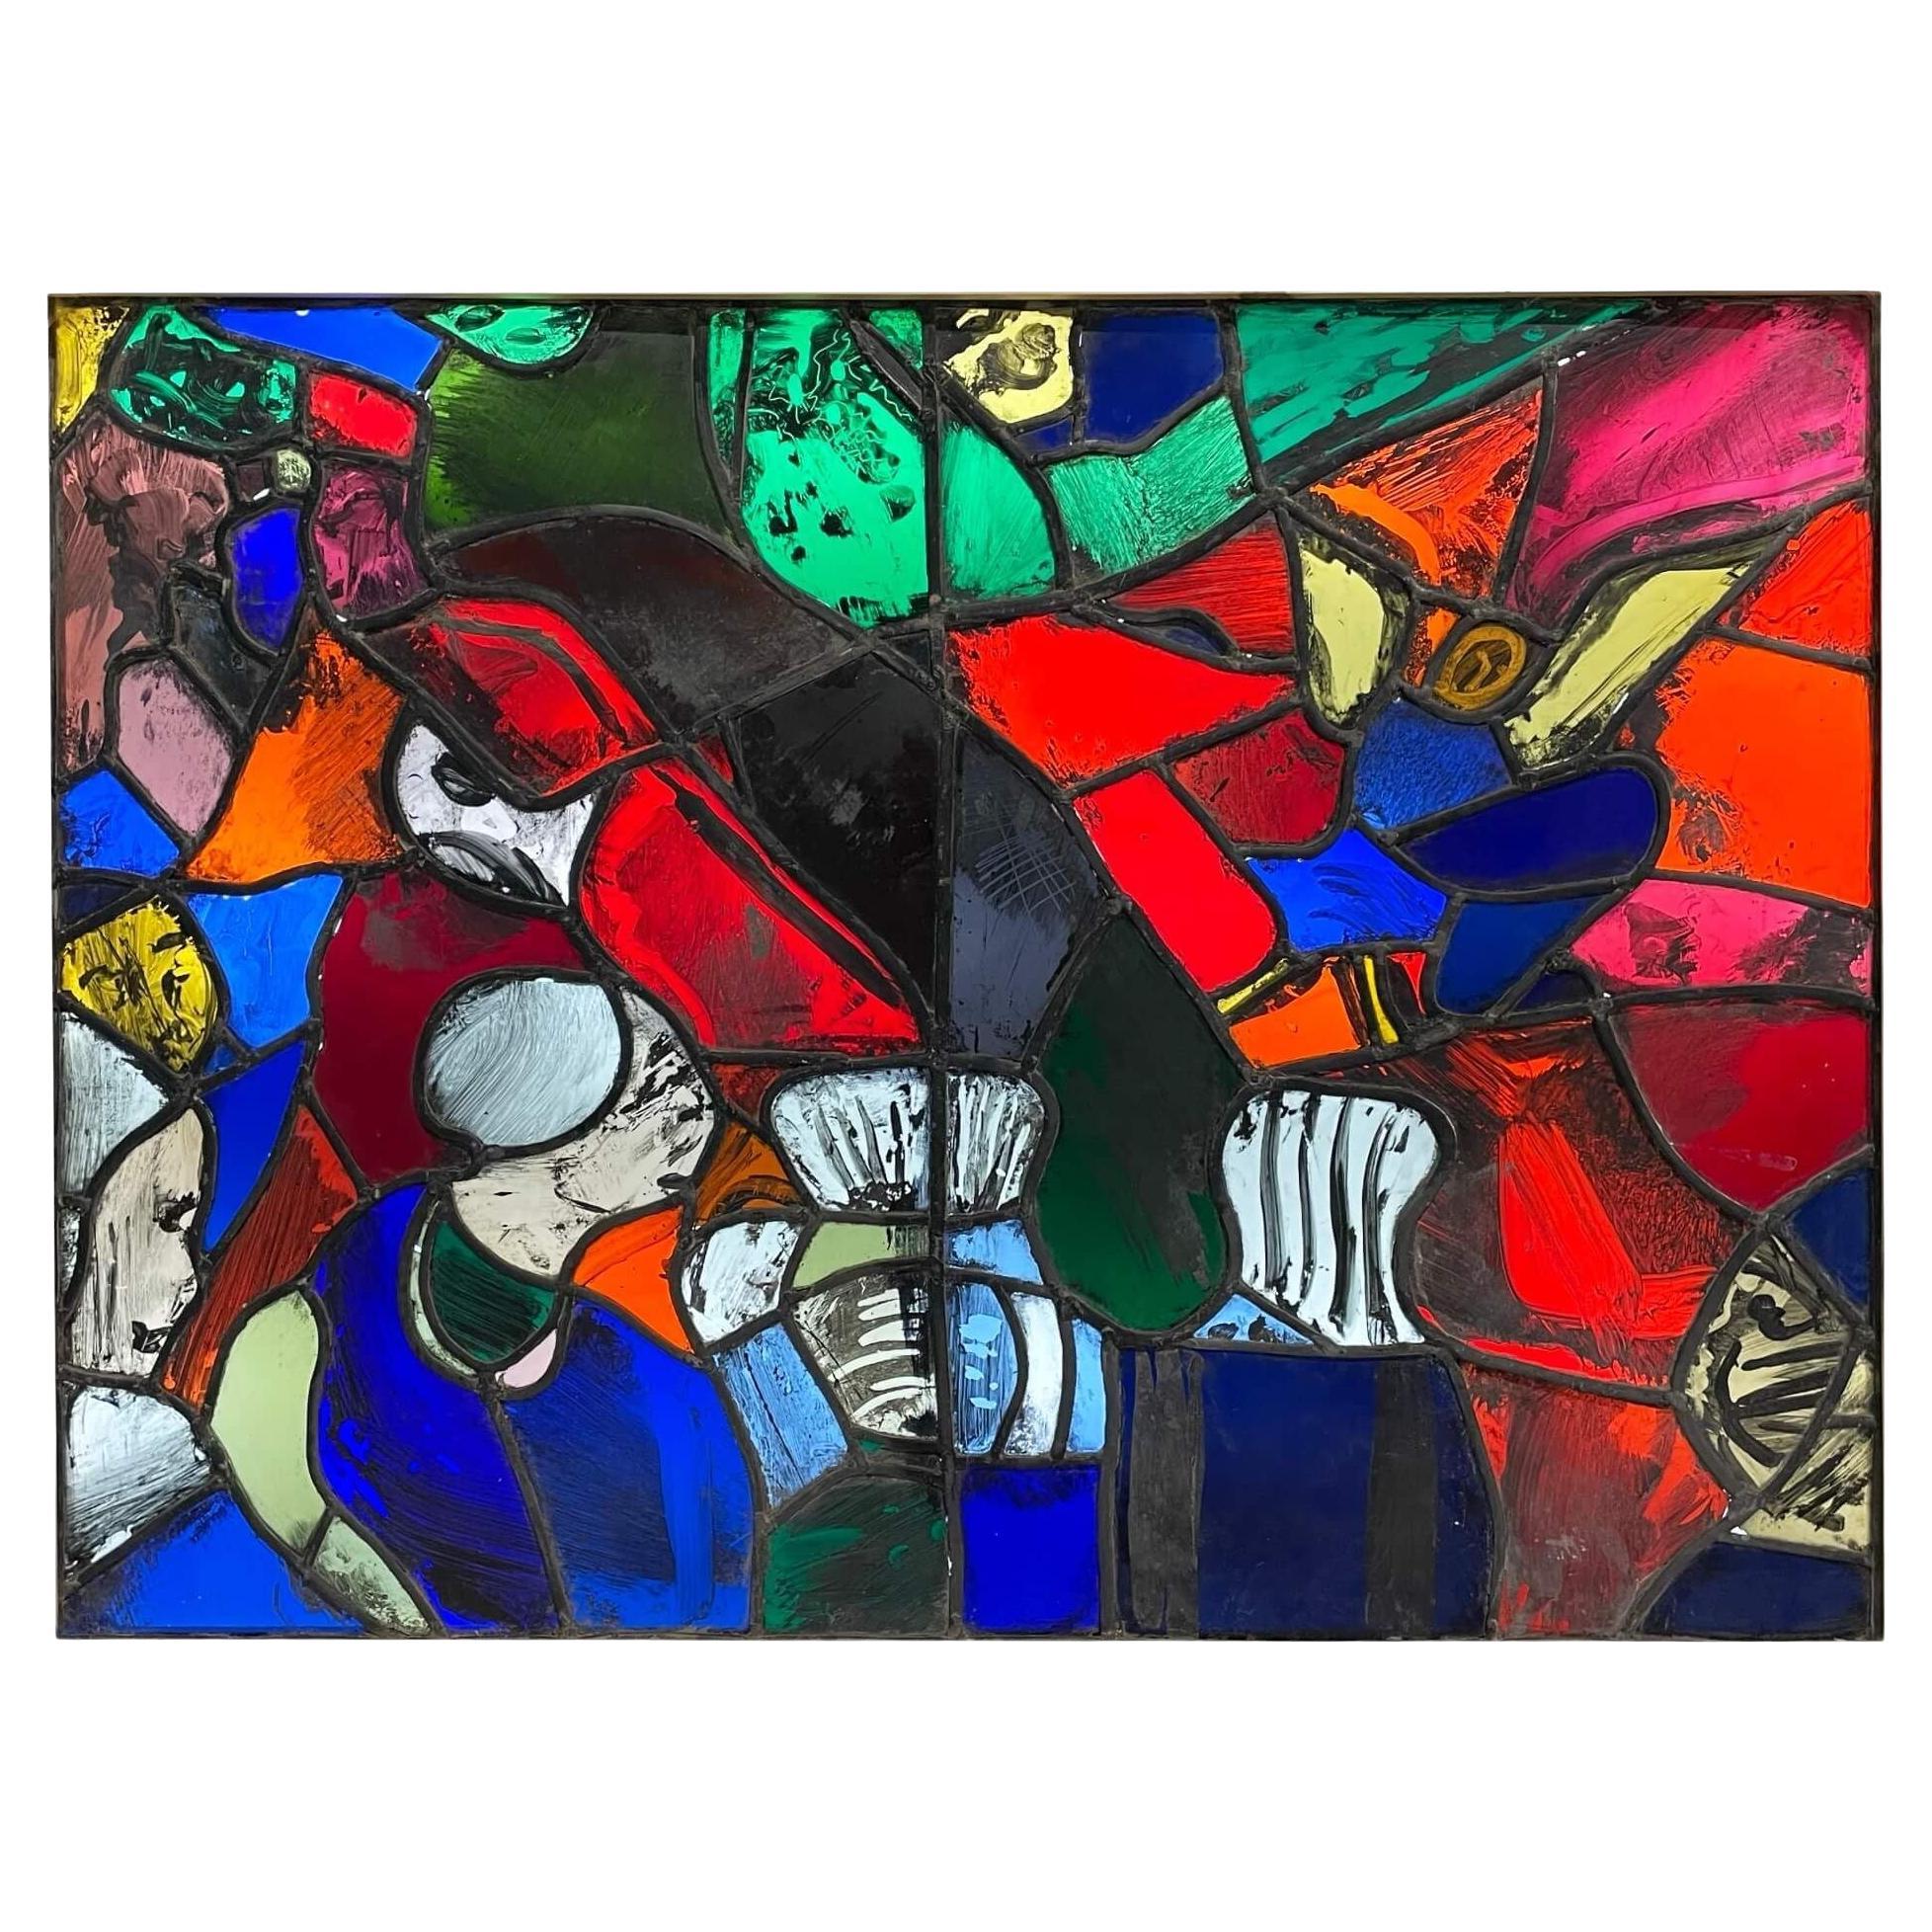 Patrick Reyntiens 'B.1925' Abstract Stained Glass Window